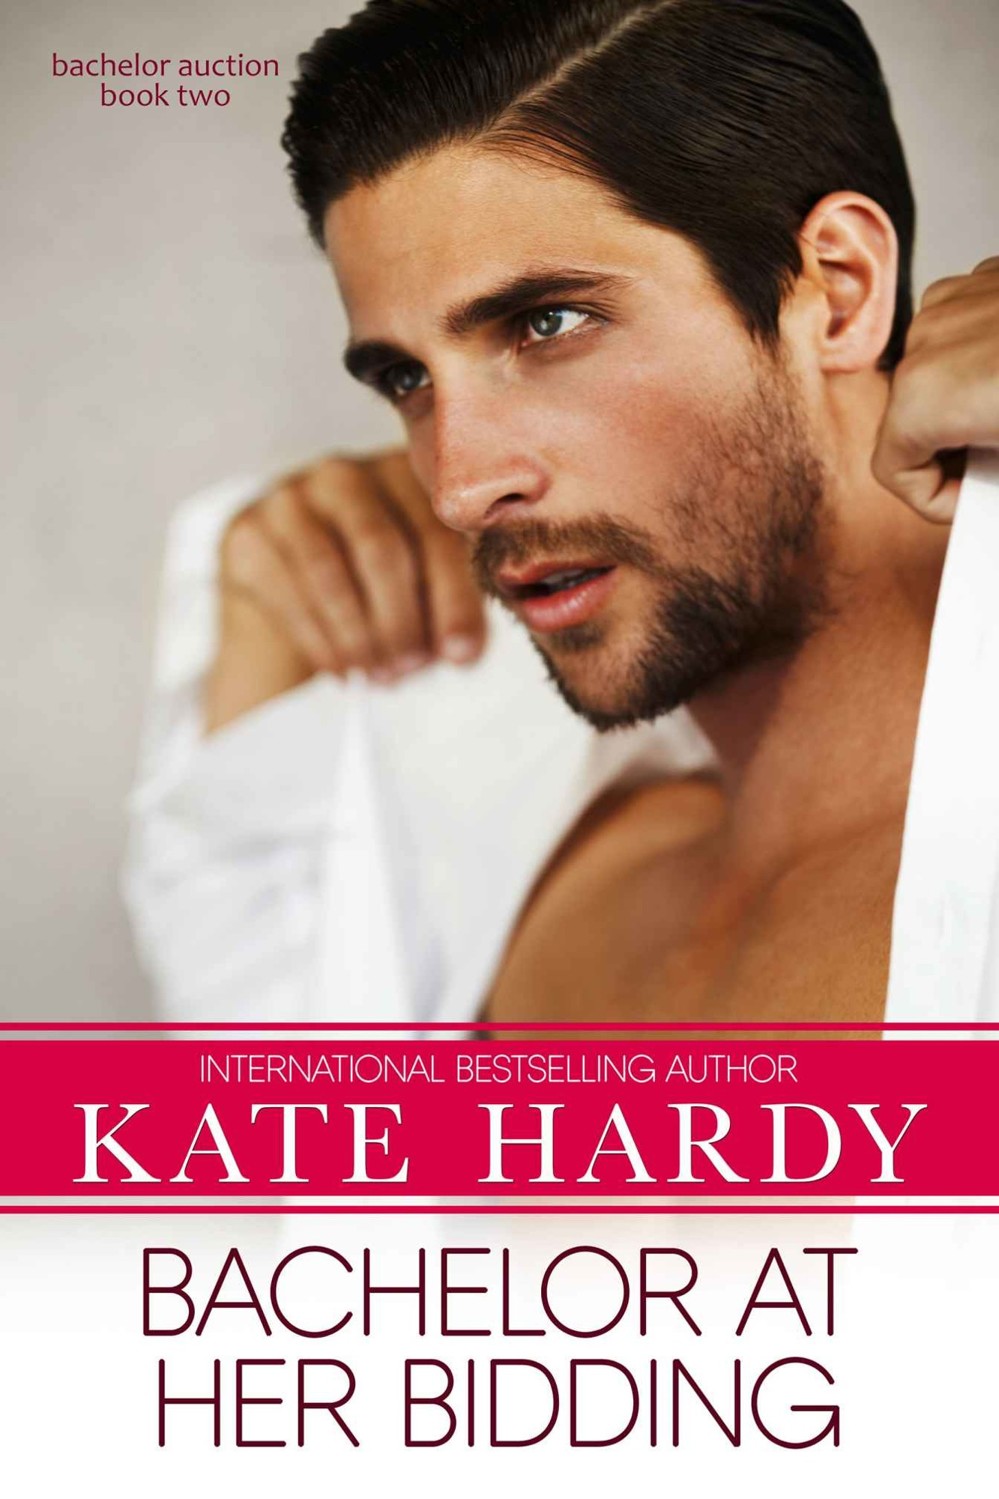 Bachelor at Her Bidding (Bachelor Auction Book 2) by Kate Hardy